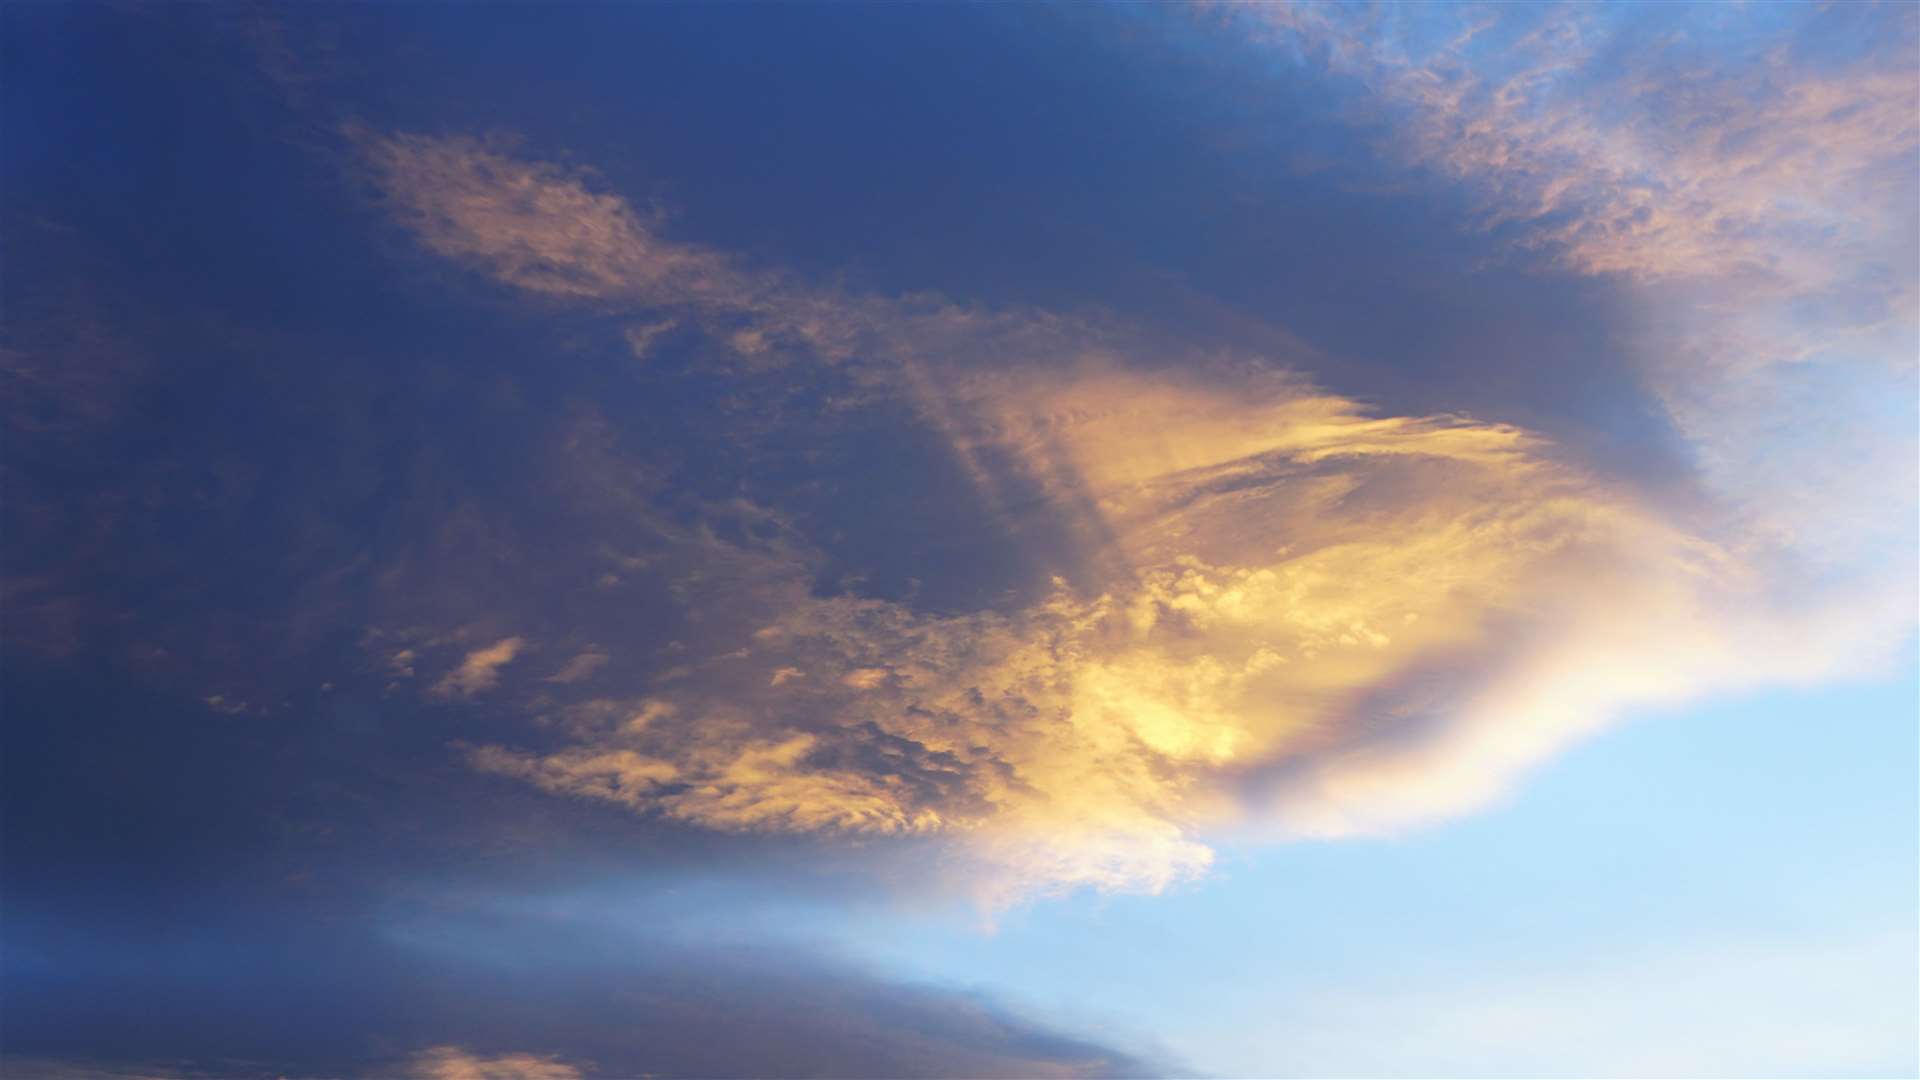 The setting sun highlighted aspects of the clouds to add extra drama to the scene. Pictures: DGS